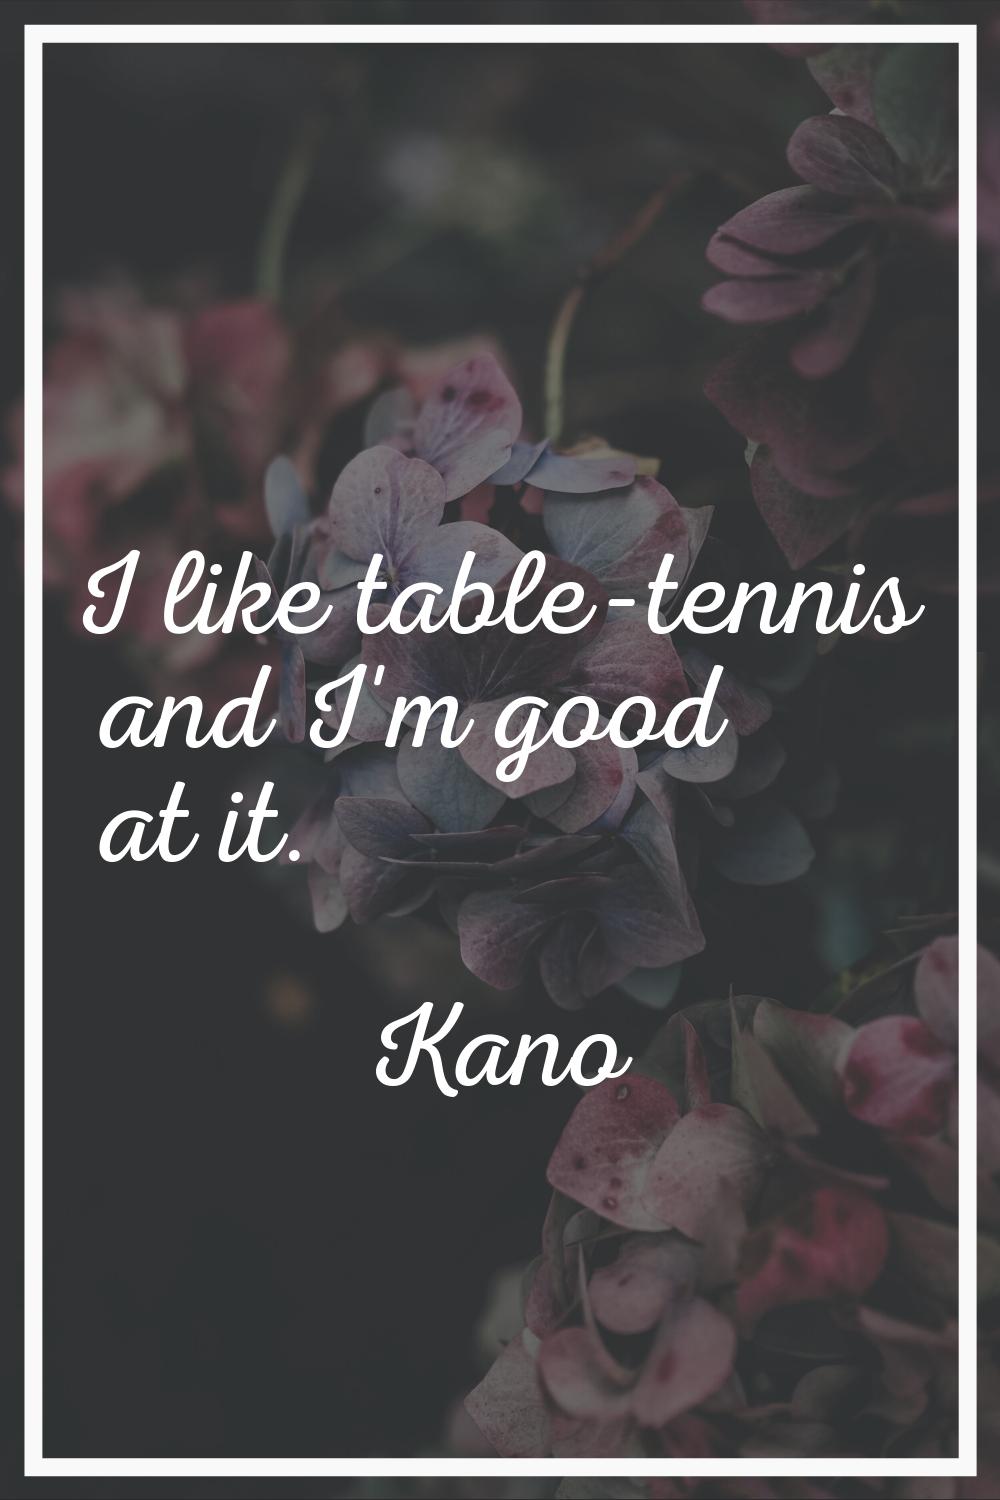 I like table-tennis and I'm good at it.